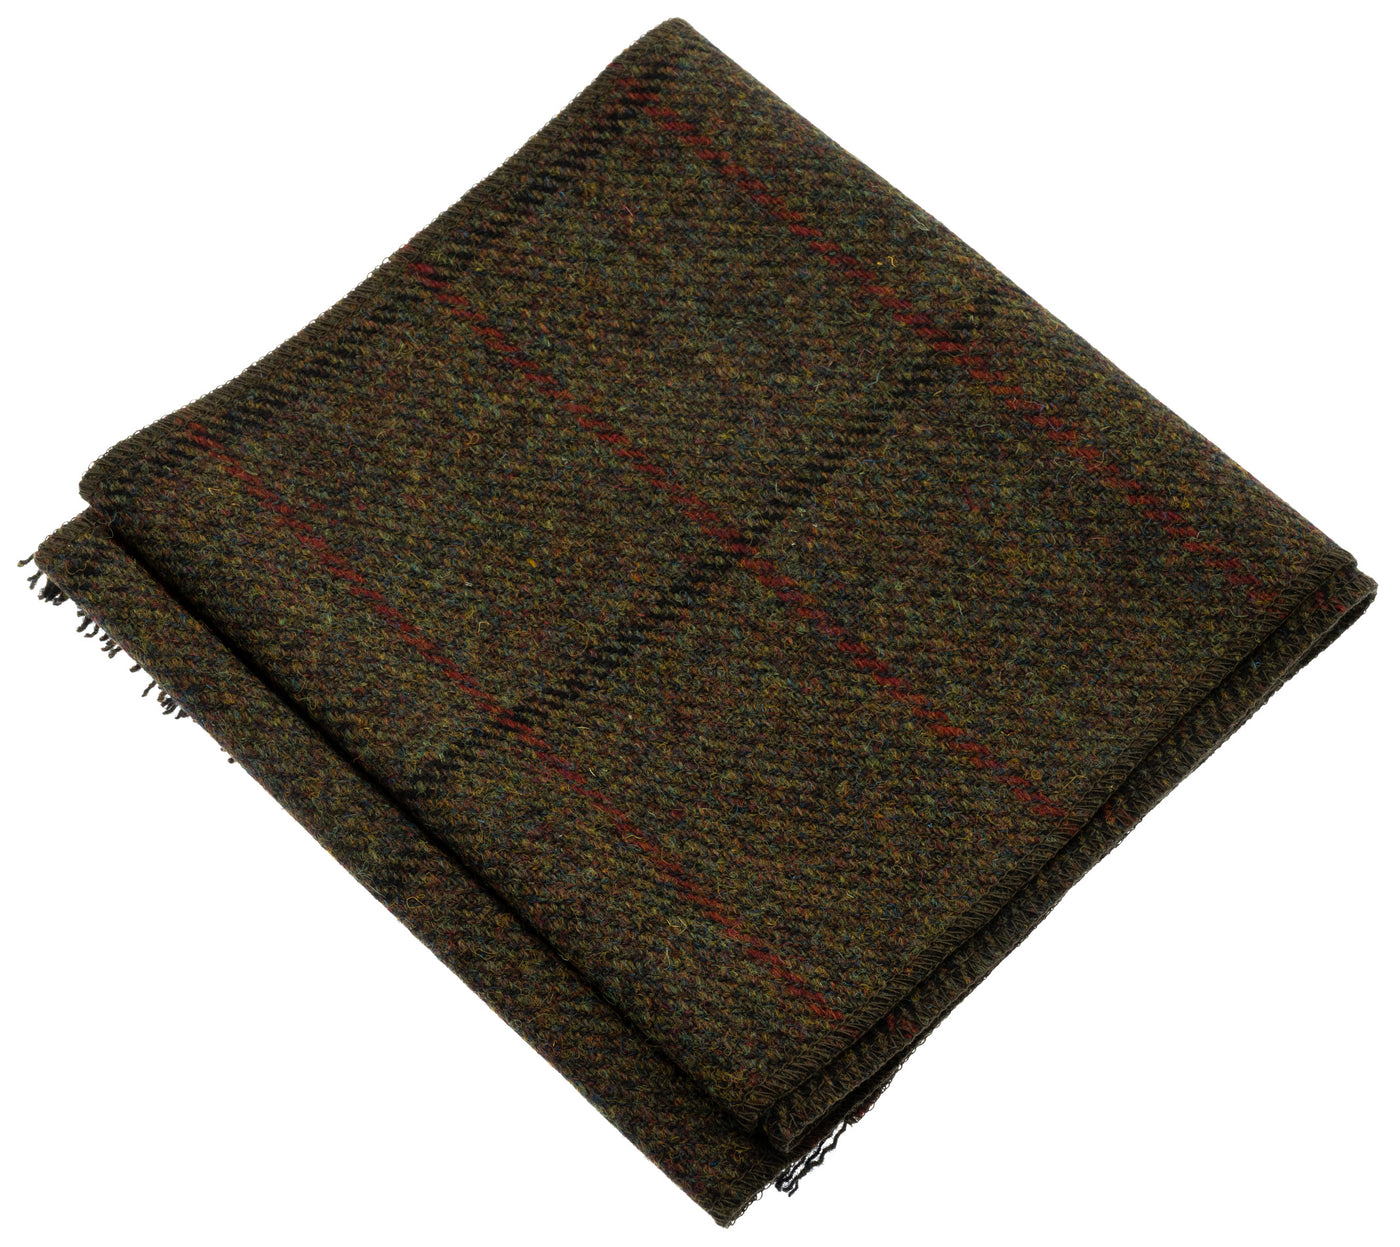 Green Harris Tweed Scarf with black and red overchecks